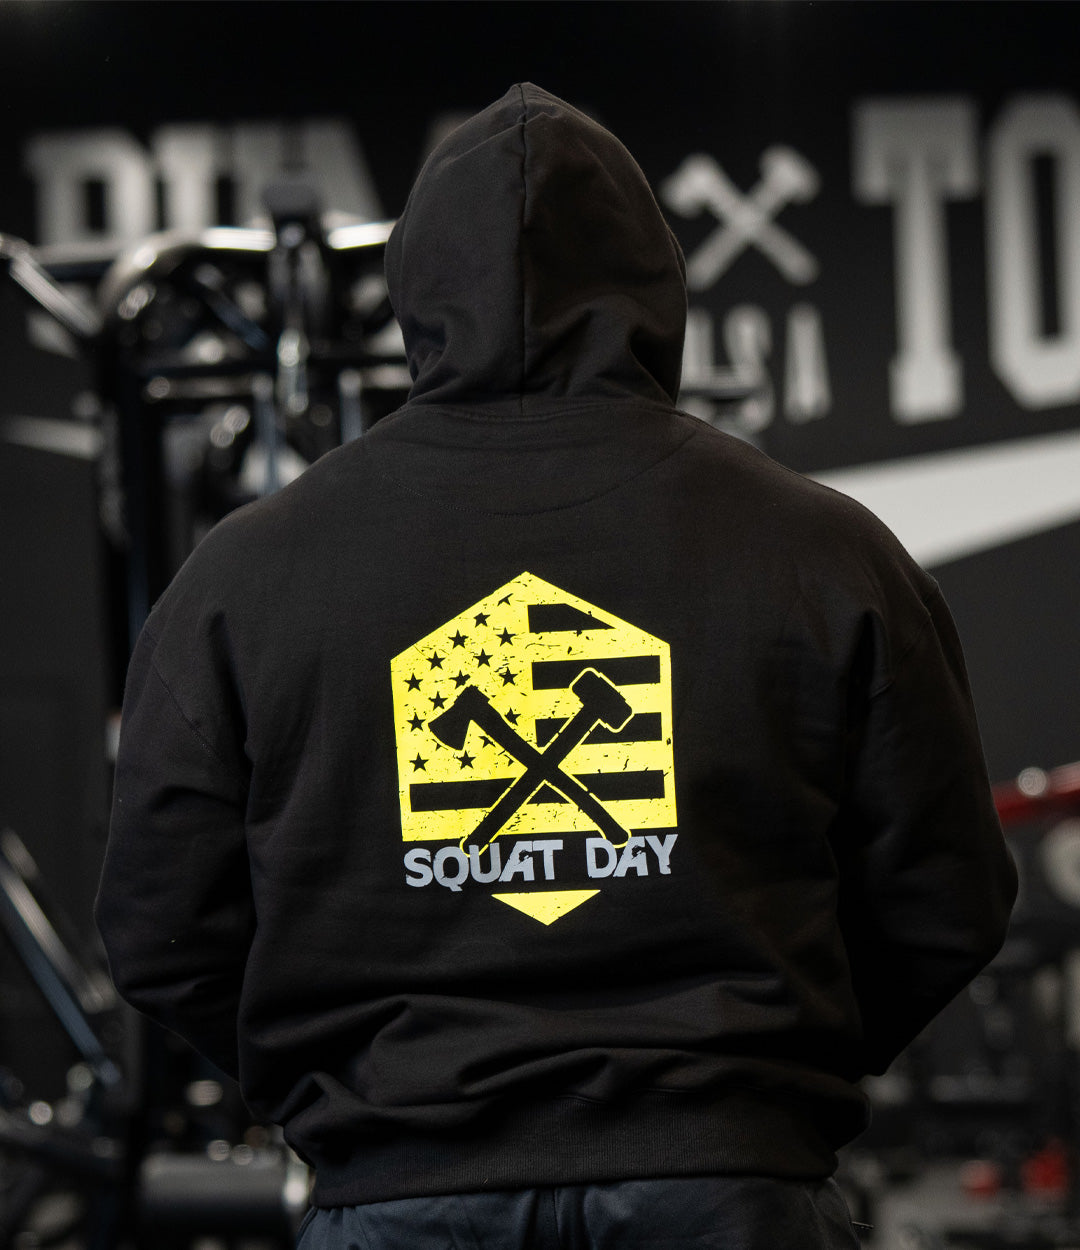 Squat Day Stretch Hoodie - All American Roughneck